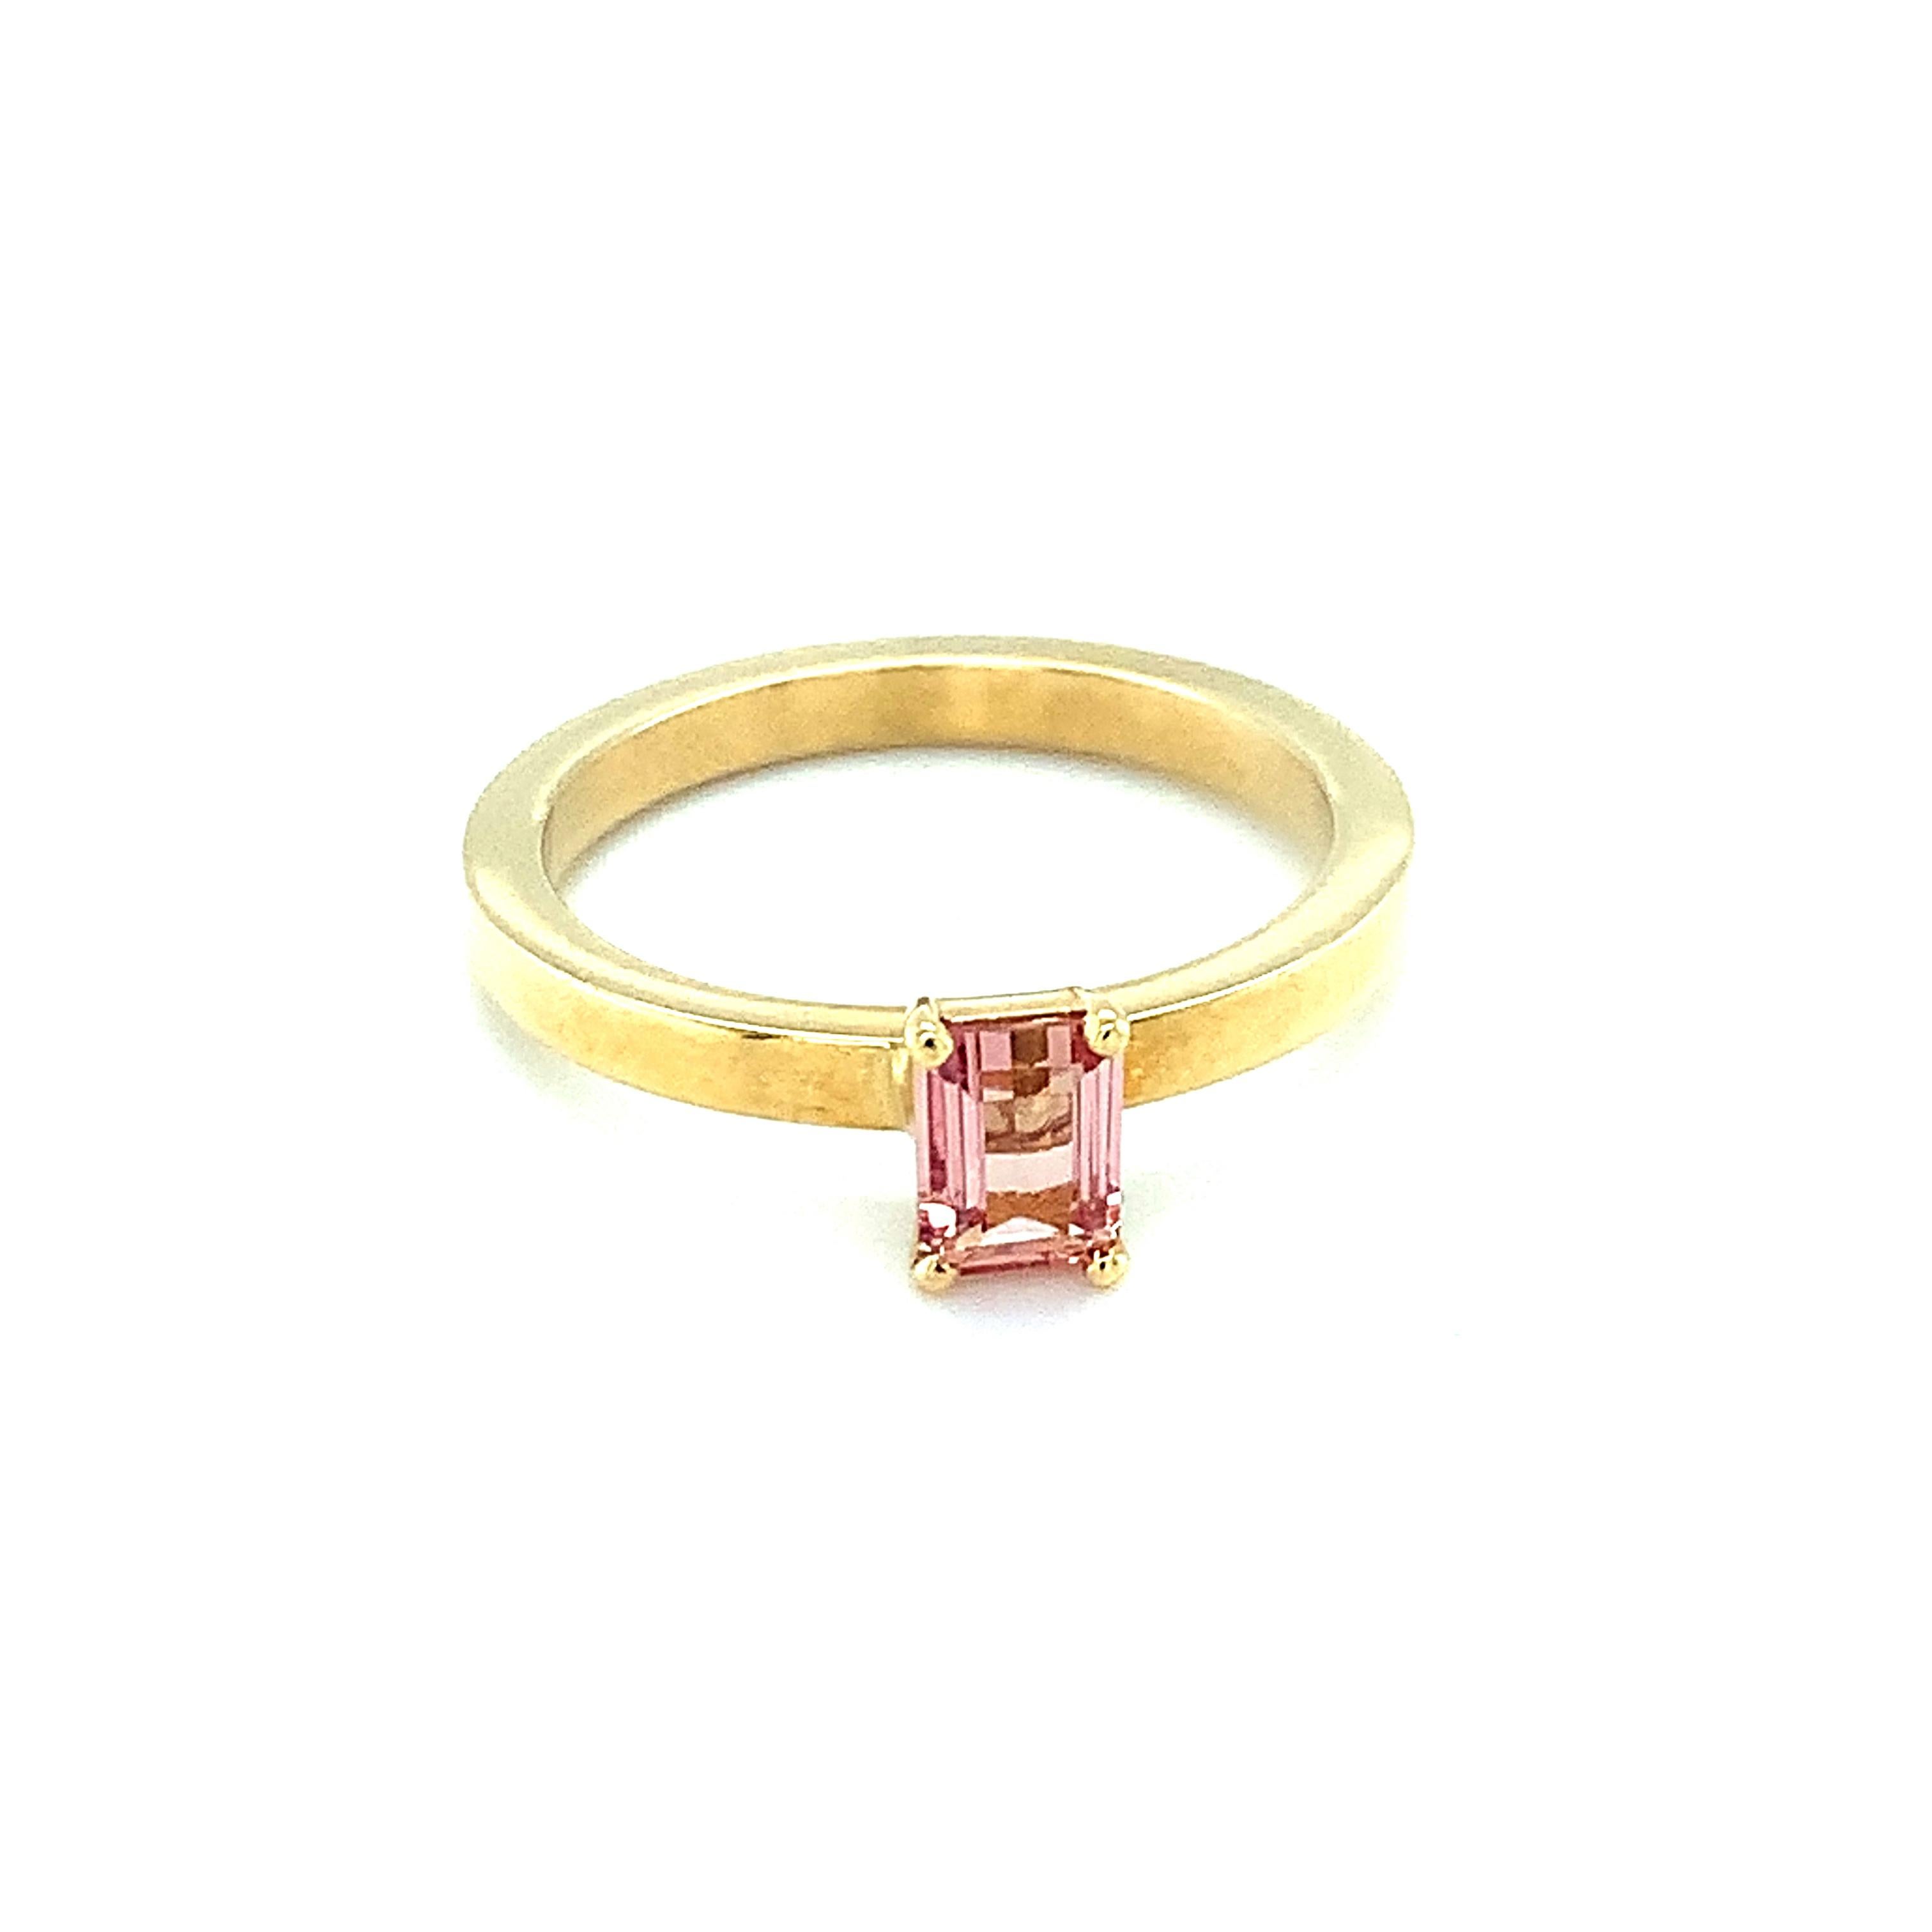 Simple and fun, this stackable topaz ring is a great for everyday. The rectangular topaz is a lovely peachy color and weighs .26 carats. Set in 18k yellow gold, this pretty ring makes a perfect gift for someone special or to yourself! Topaz is the